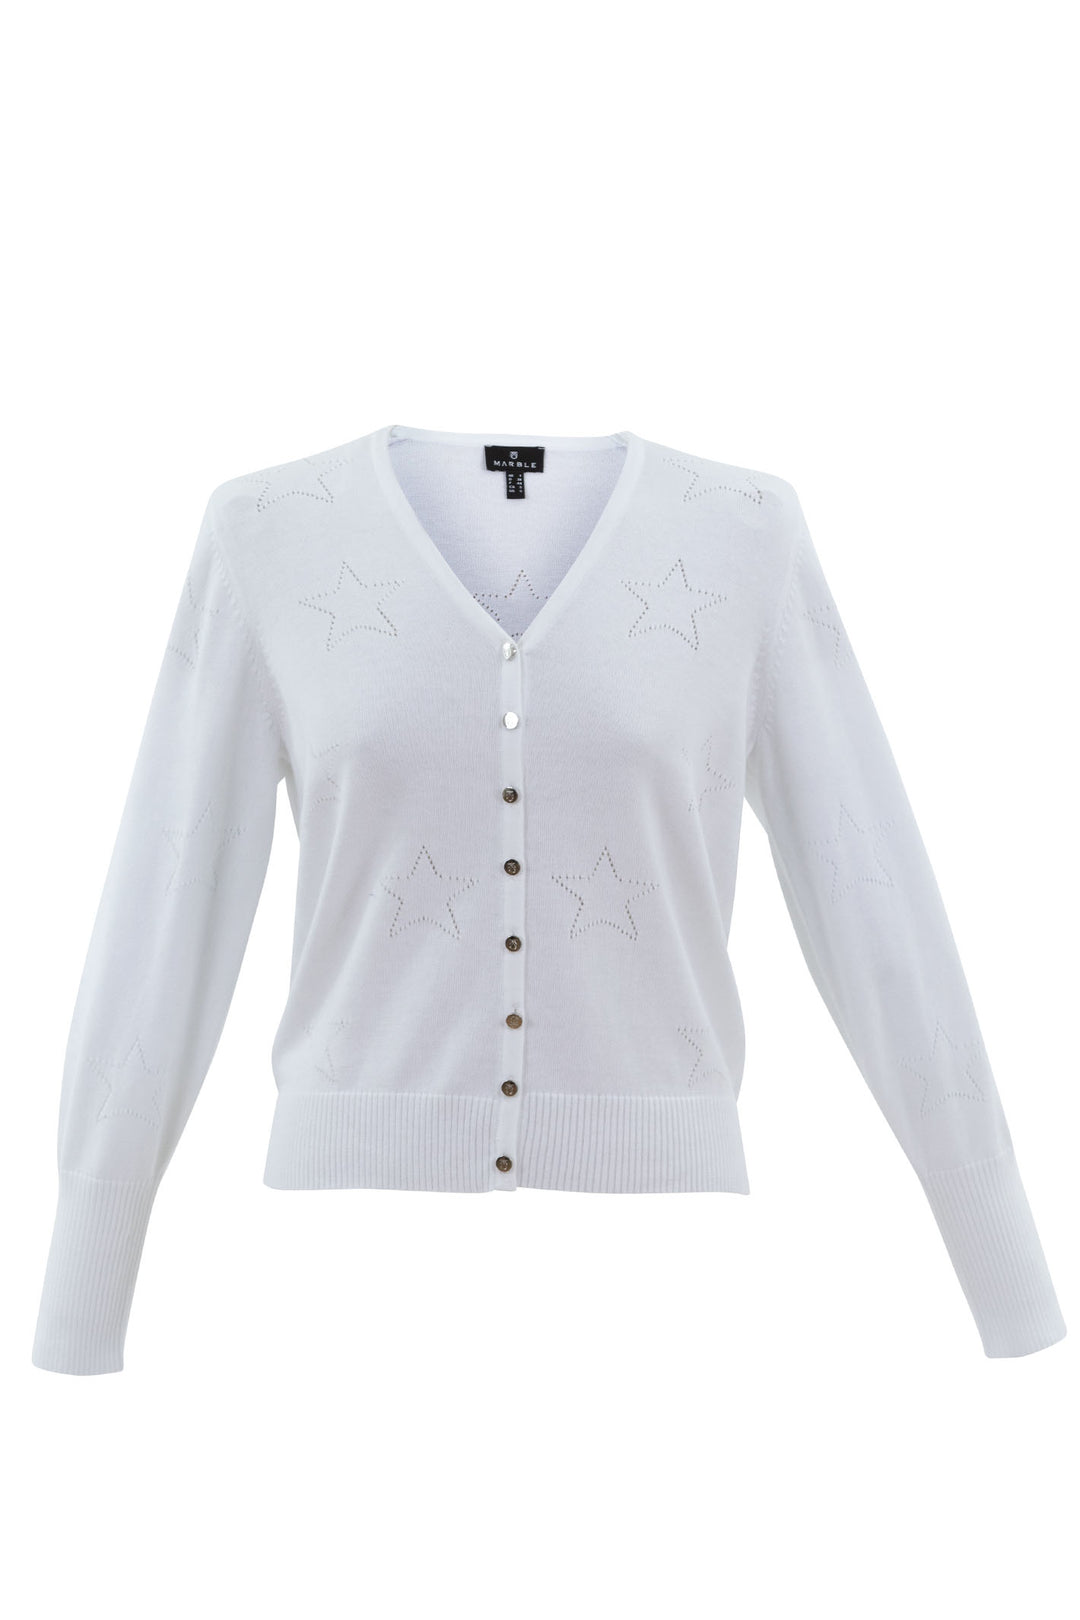 Marble Fashions 7435 102 White Star Pattern Cardigan - Experience Boutique